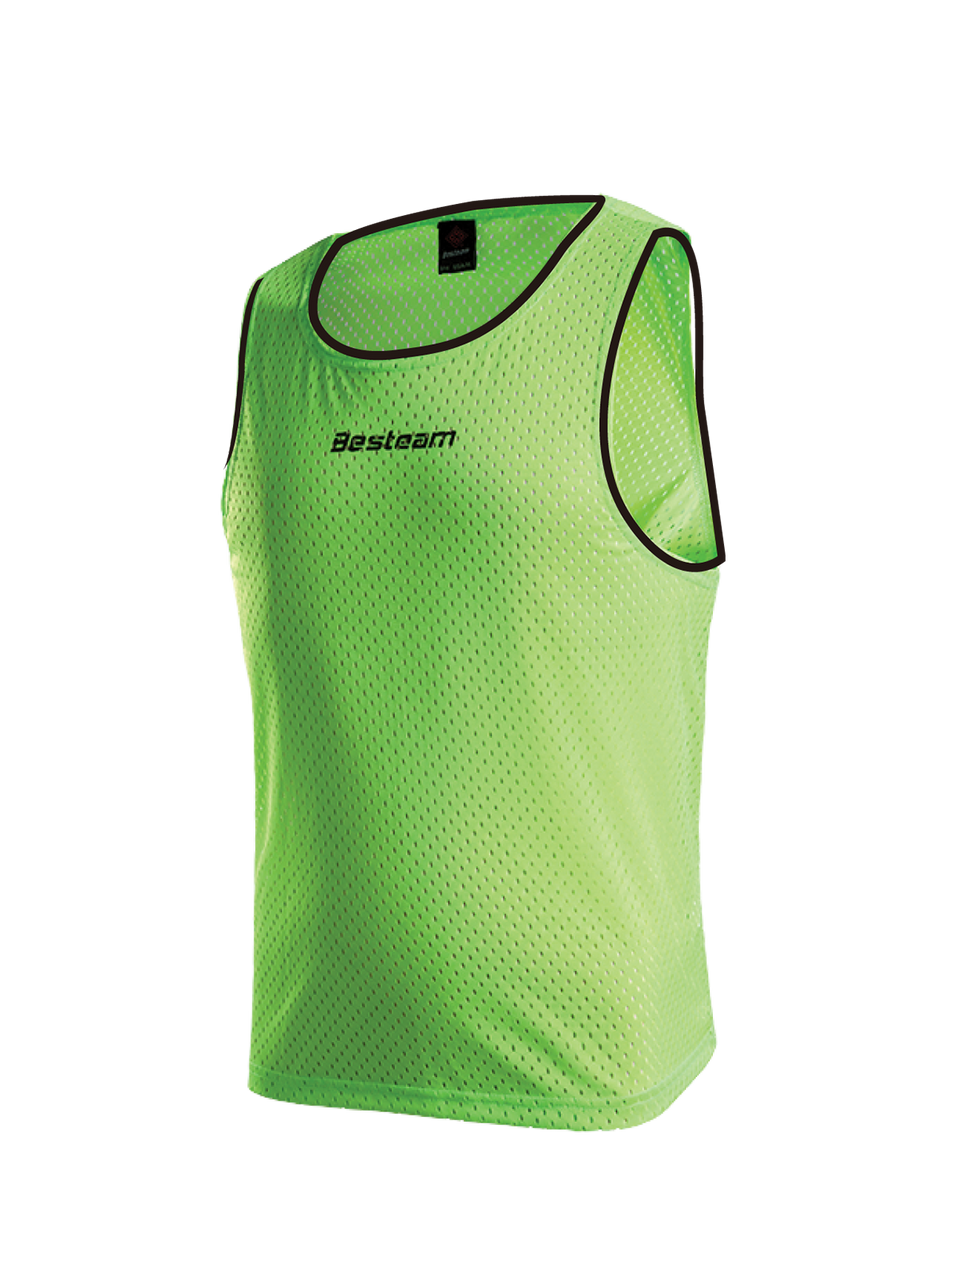 Besteam Soccer Bibs: Vibrant Colors for Adults and Kiddies – Besteam Sport